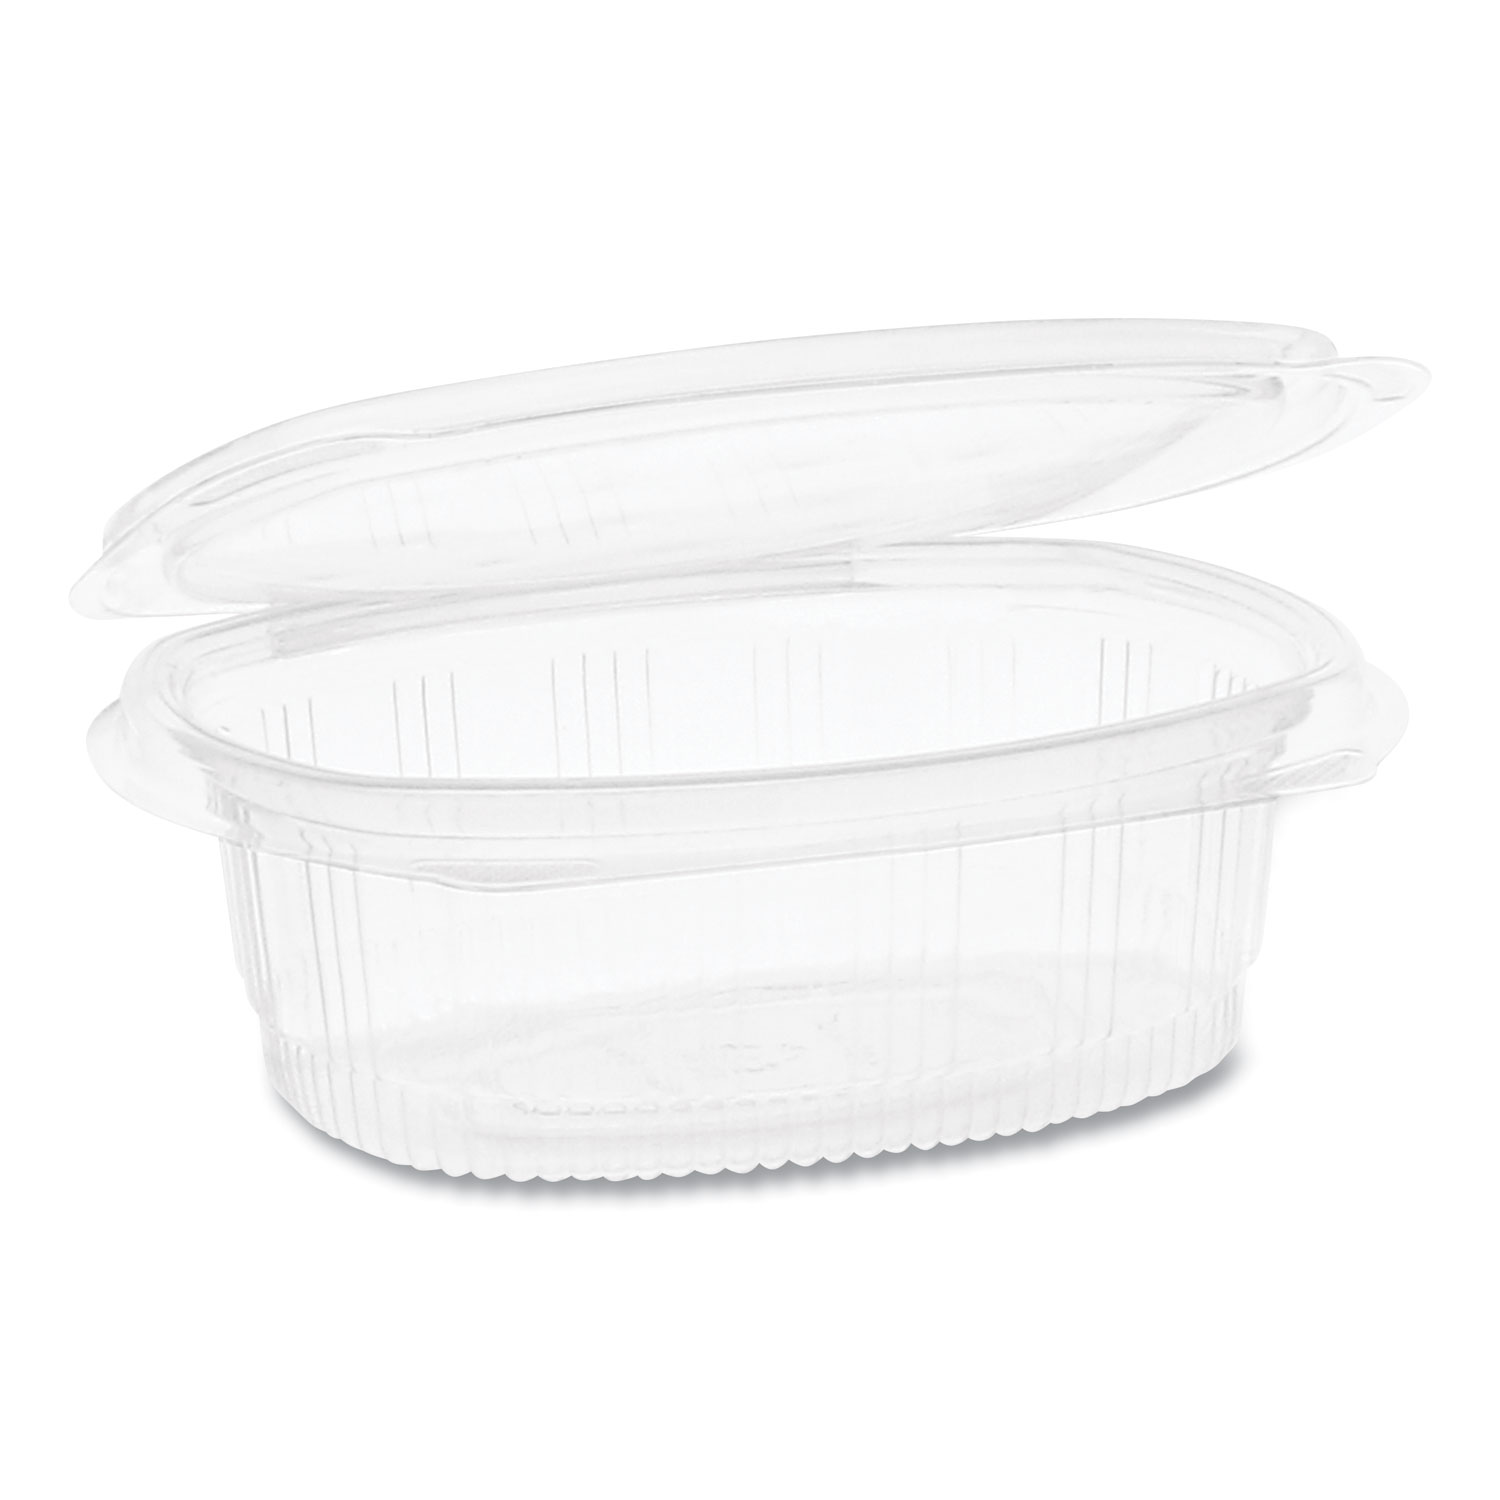  Pactiv 0CA910160000 EarthChoice PET Hinged Lid Deli Container, 4.92 x 5.87 x 2.48, 16 oz, 1-Compartment, Clear, 200/Carton (PCT0CA910160000) 